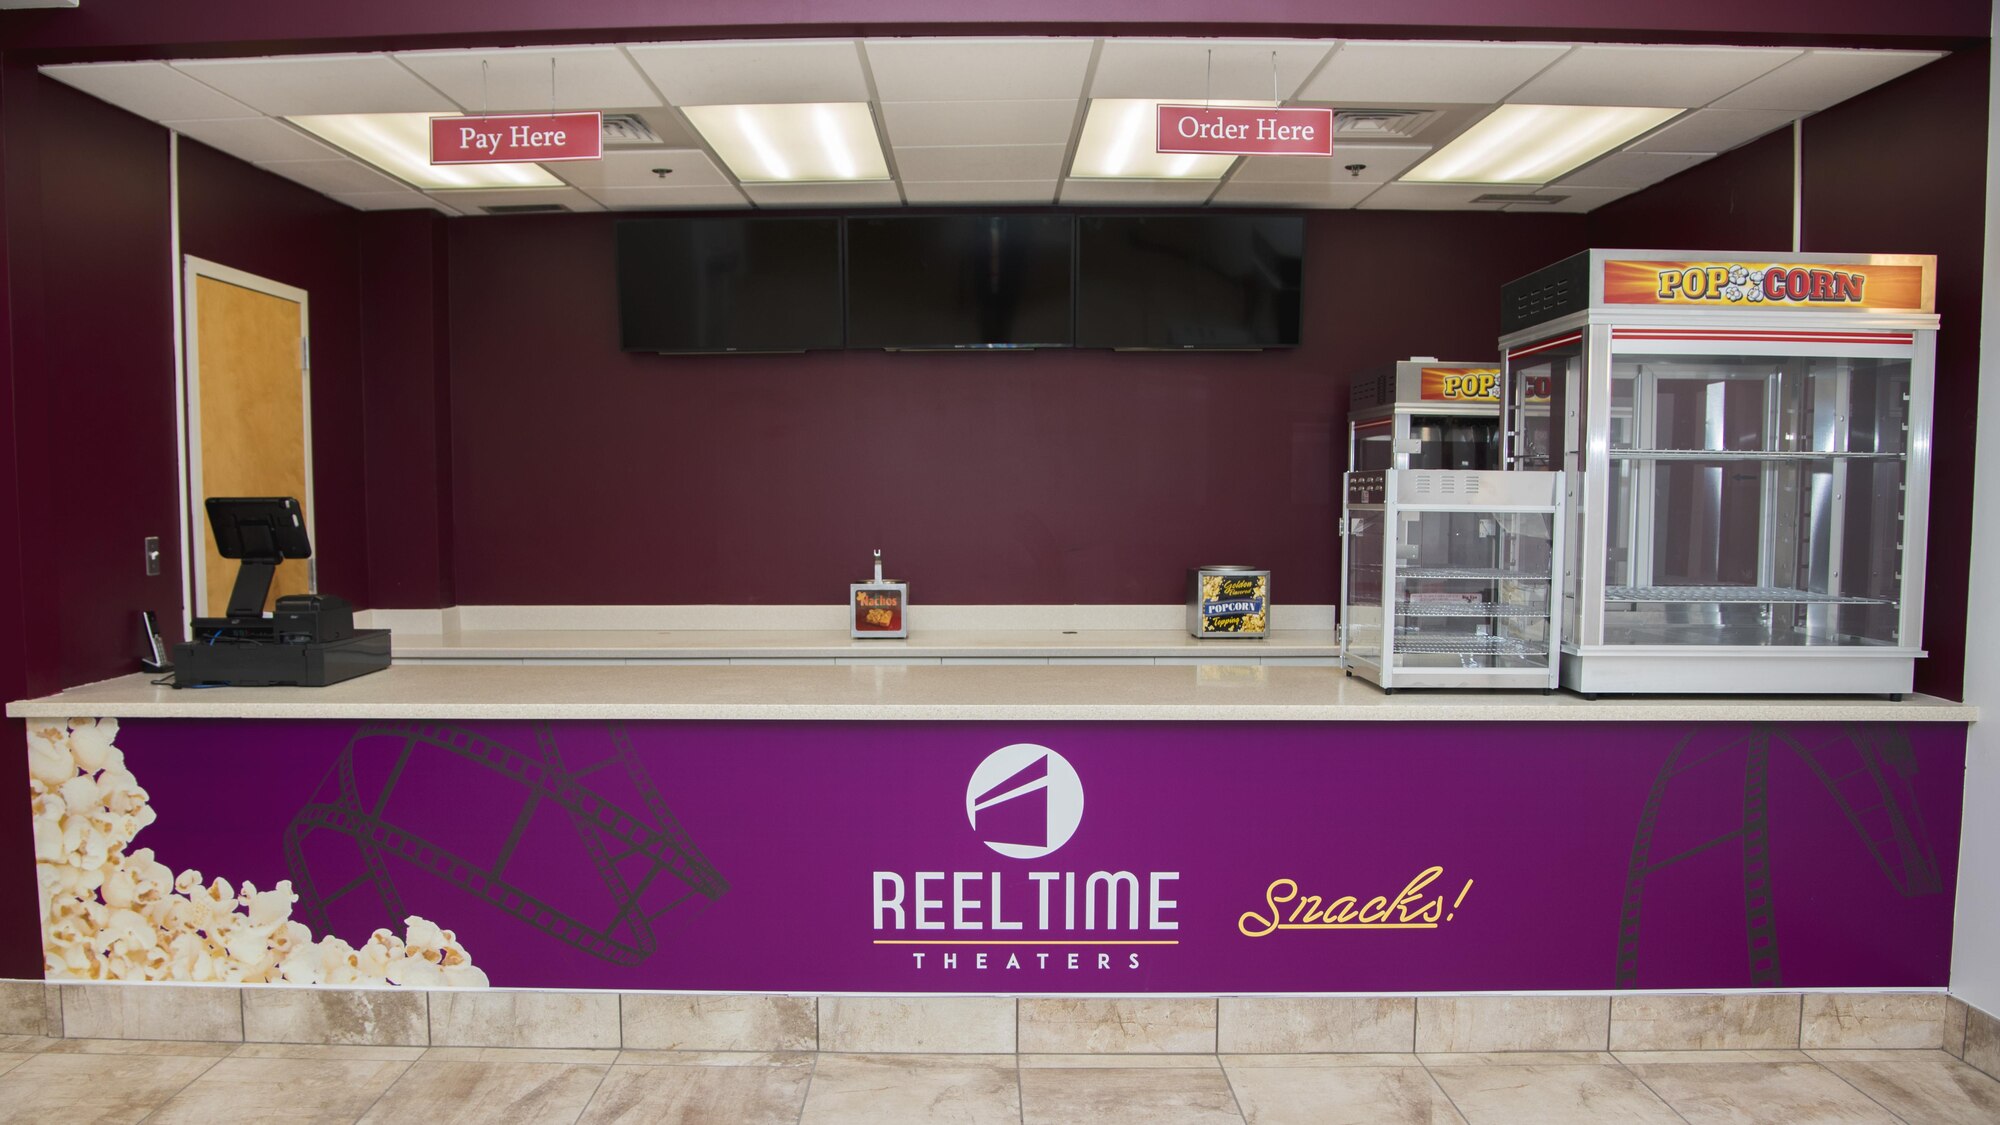 A newly renovated concession stand sits inside the base theater at Joint Base Andrews, Md., March 3, 2017. The theater building was revamped with new seats, sound system, projector, and concession stand, which will be debuted at the theater’s grand opening scheduled for March 4, 2017, at 7 p.m. (U.S. Air Force photo by Airman 1st Class Valentina Lopez)